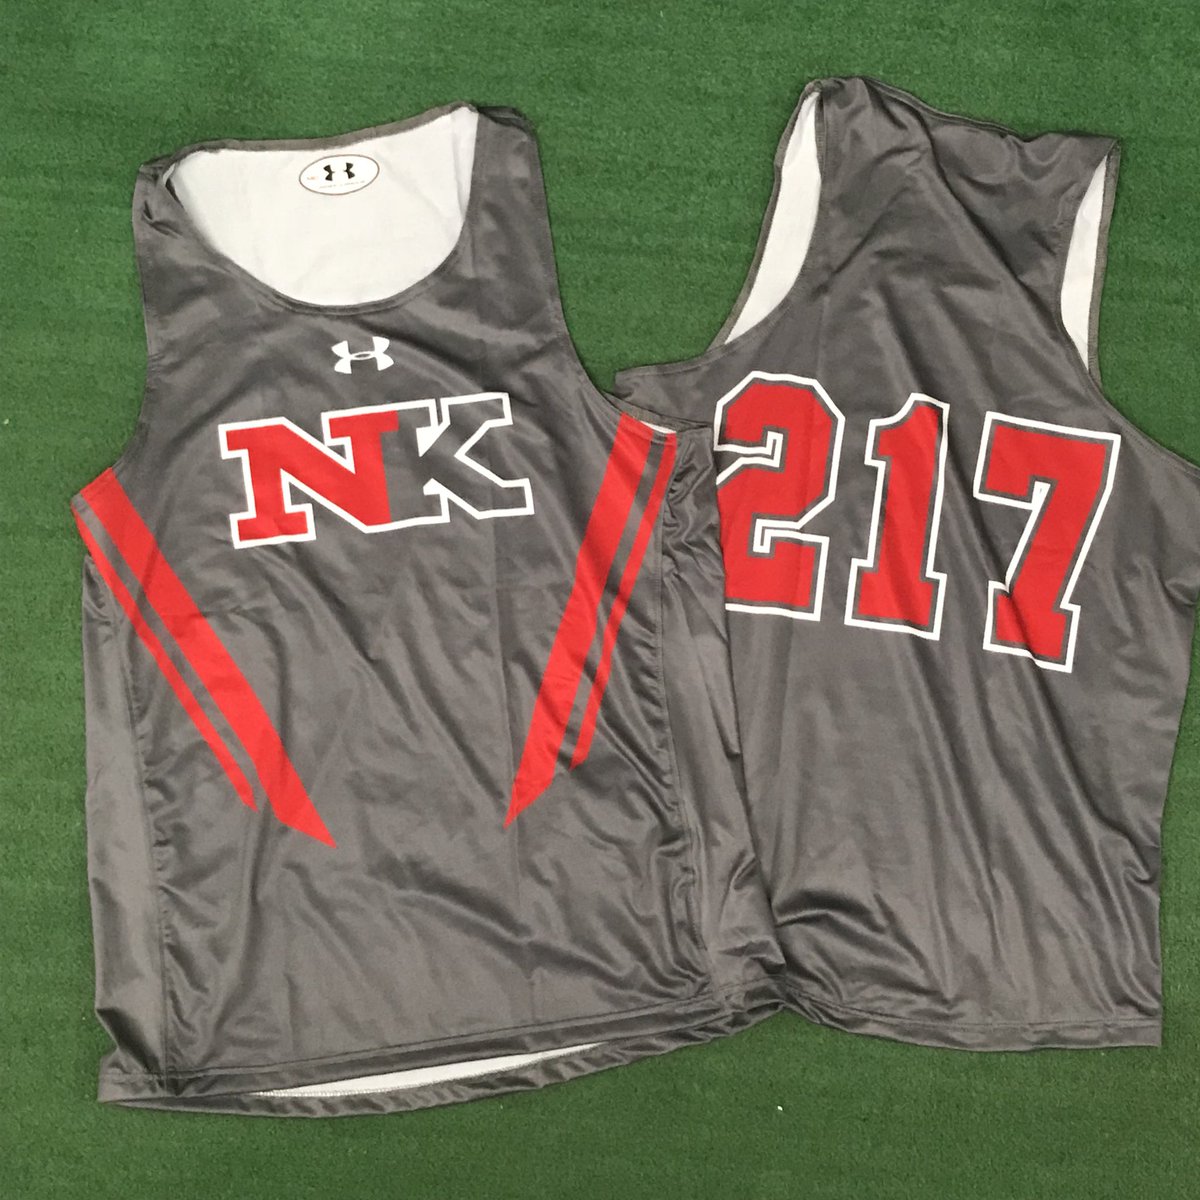 Custom sublimated @UnderArmour track/cross country uniforms for @nkrangers #TeamASG #TeamUniforms #UnderArmour